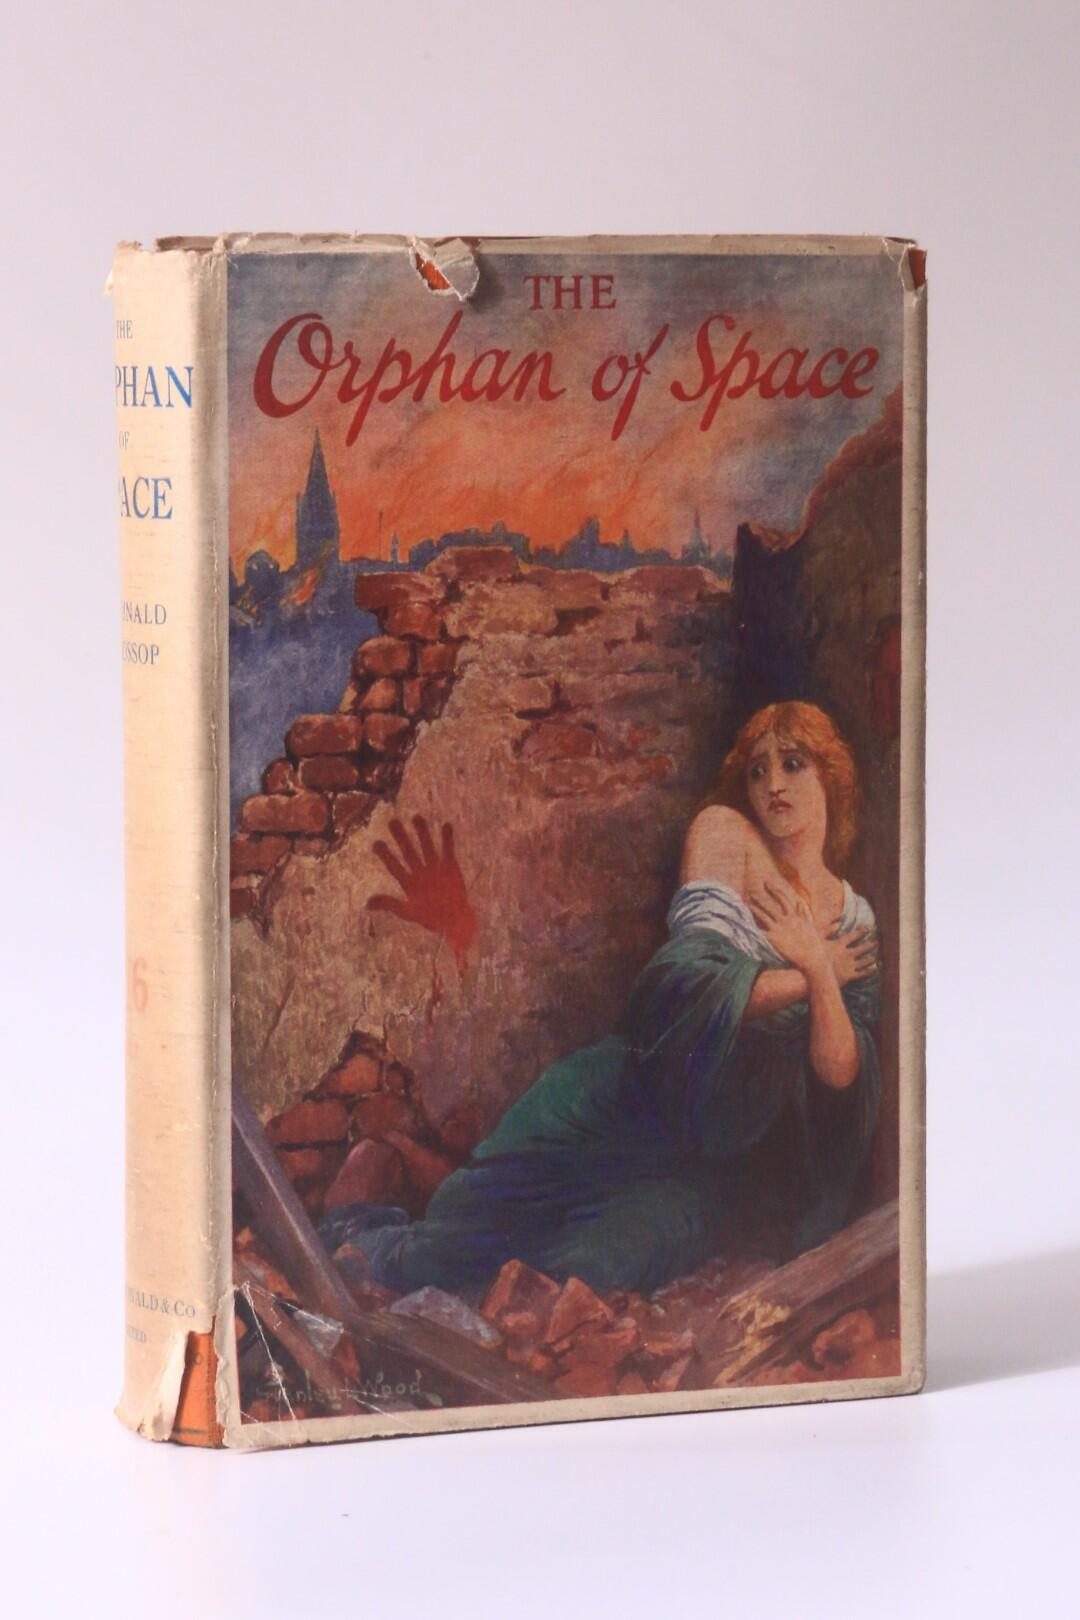 Reginald Glossop - The Orphan of Space - G. MacDonald & Co., 1926, Signed First Edition.